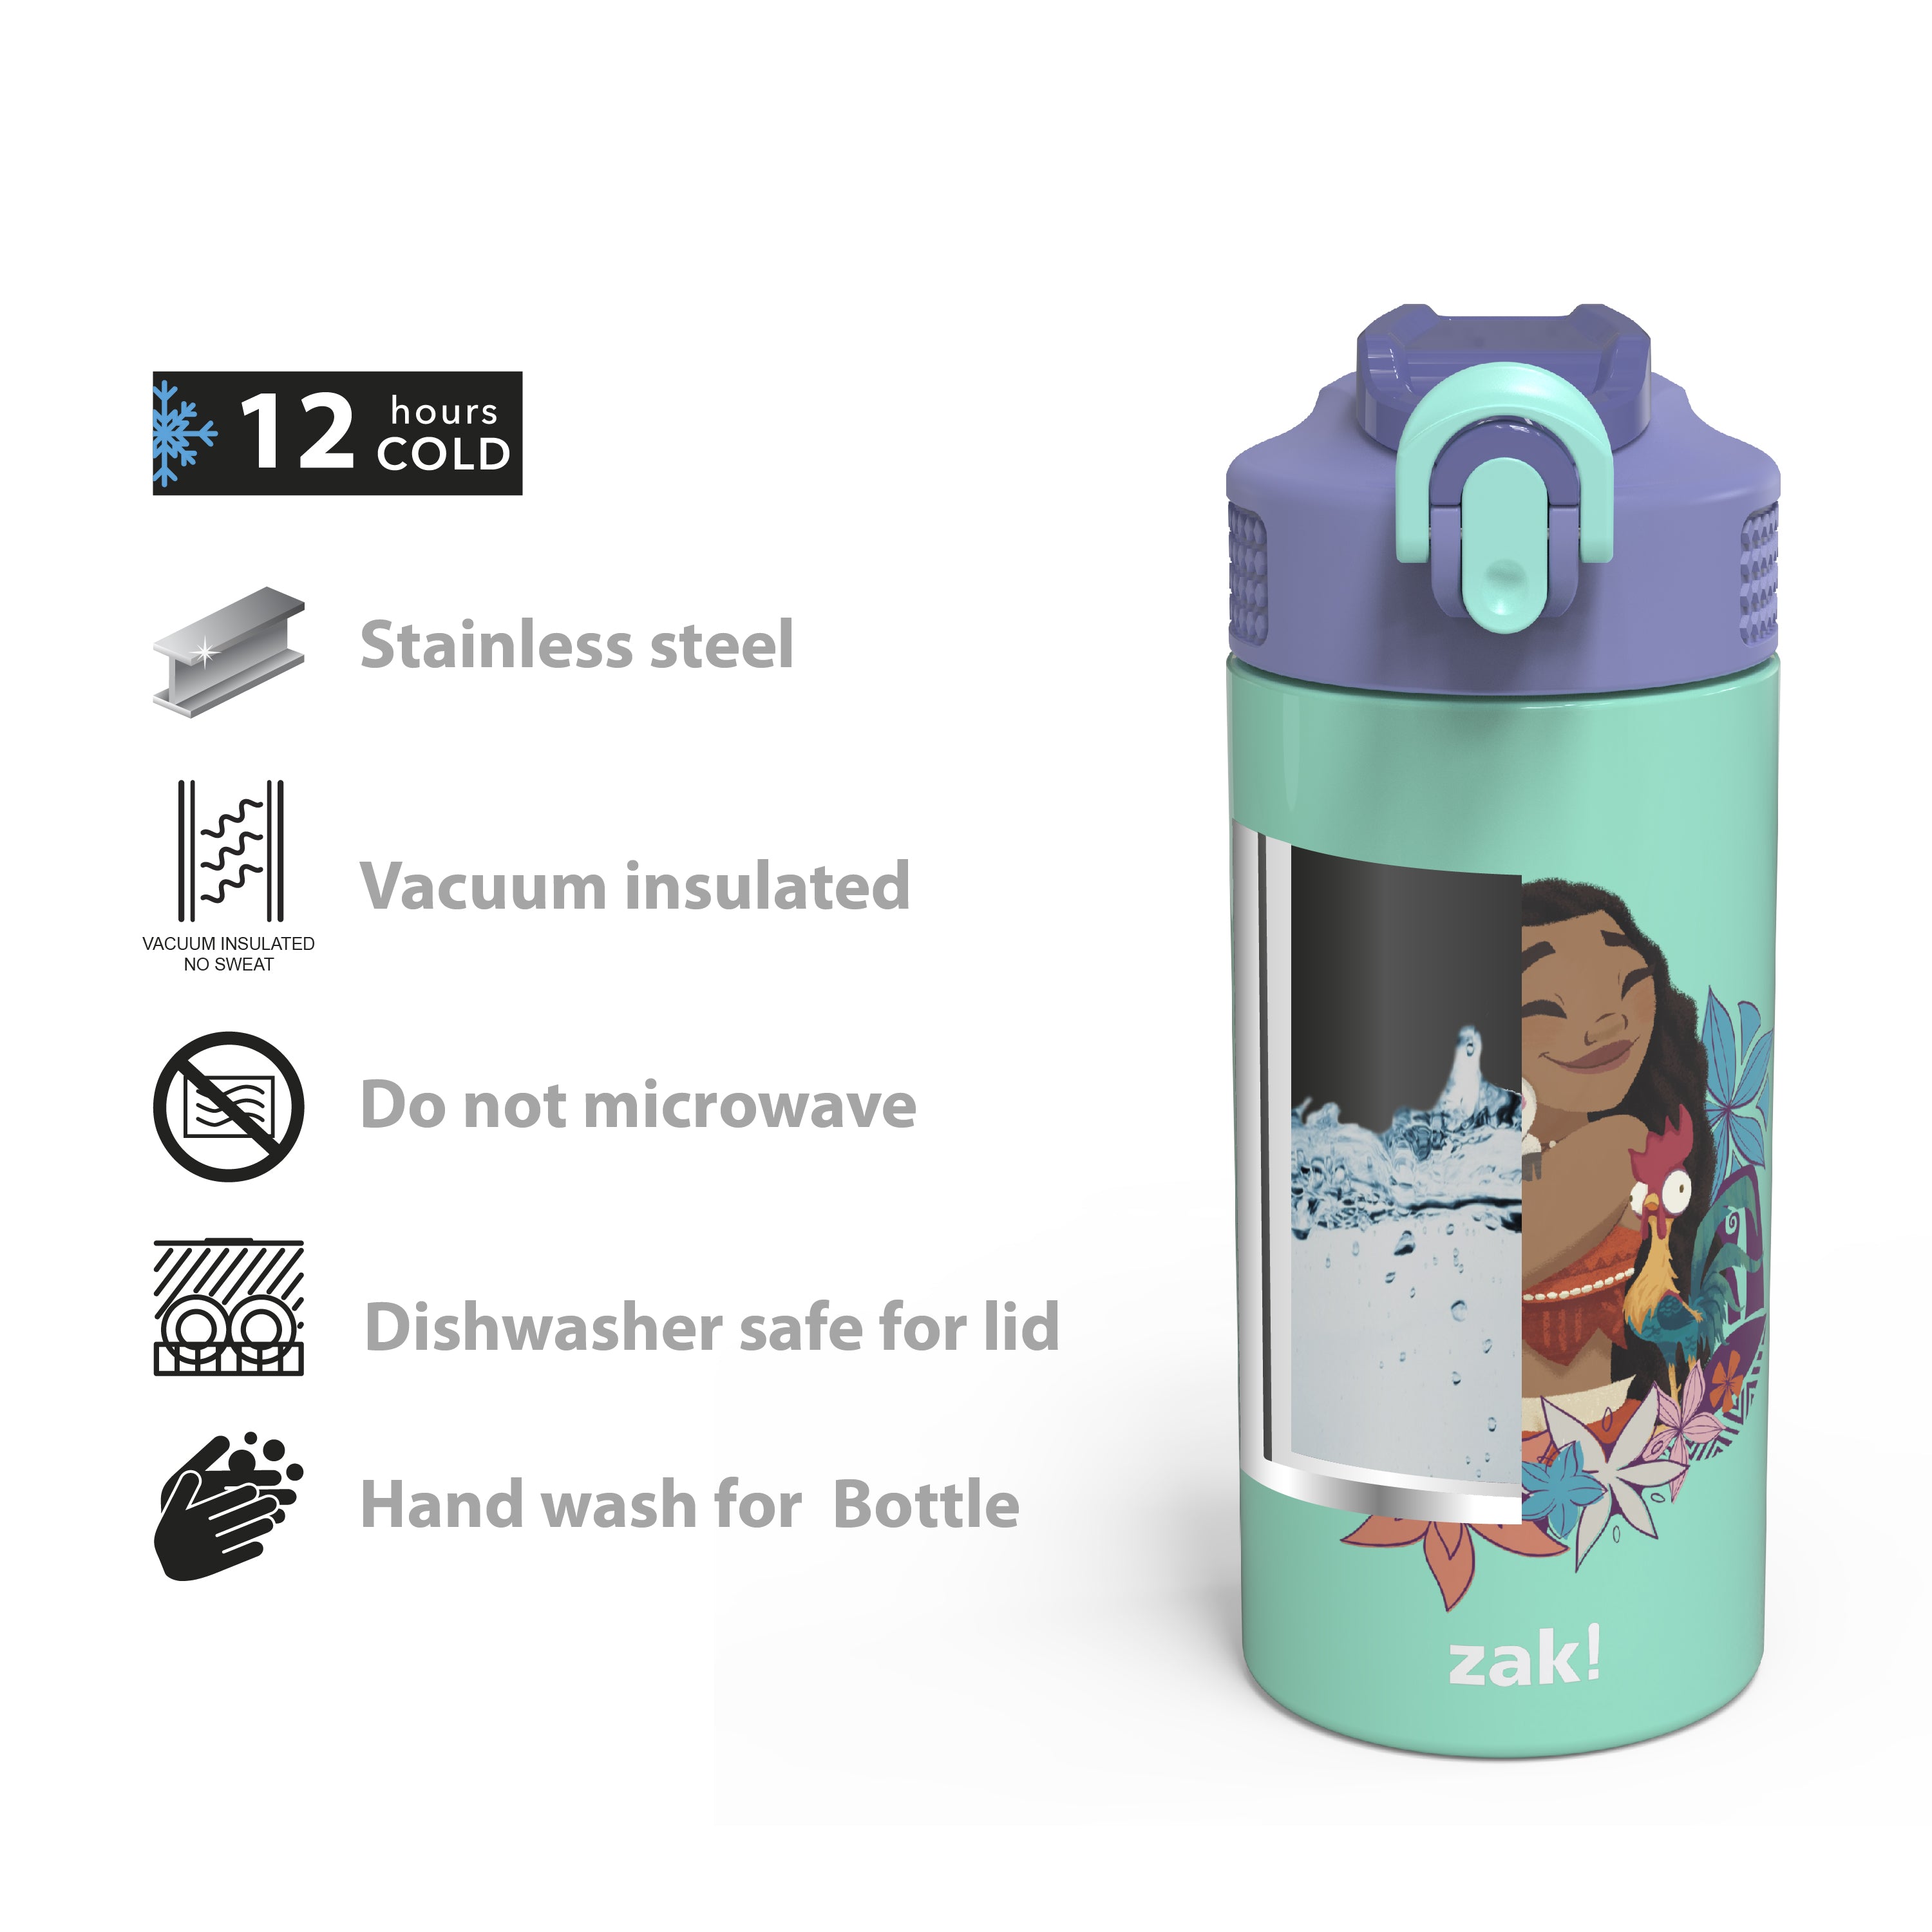 Disney Moana Kids Stainless Steel Leak Proof Water Bottle with Push Button Lid and Spout